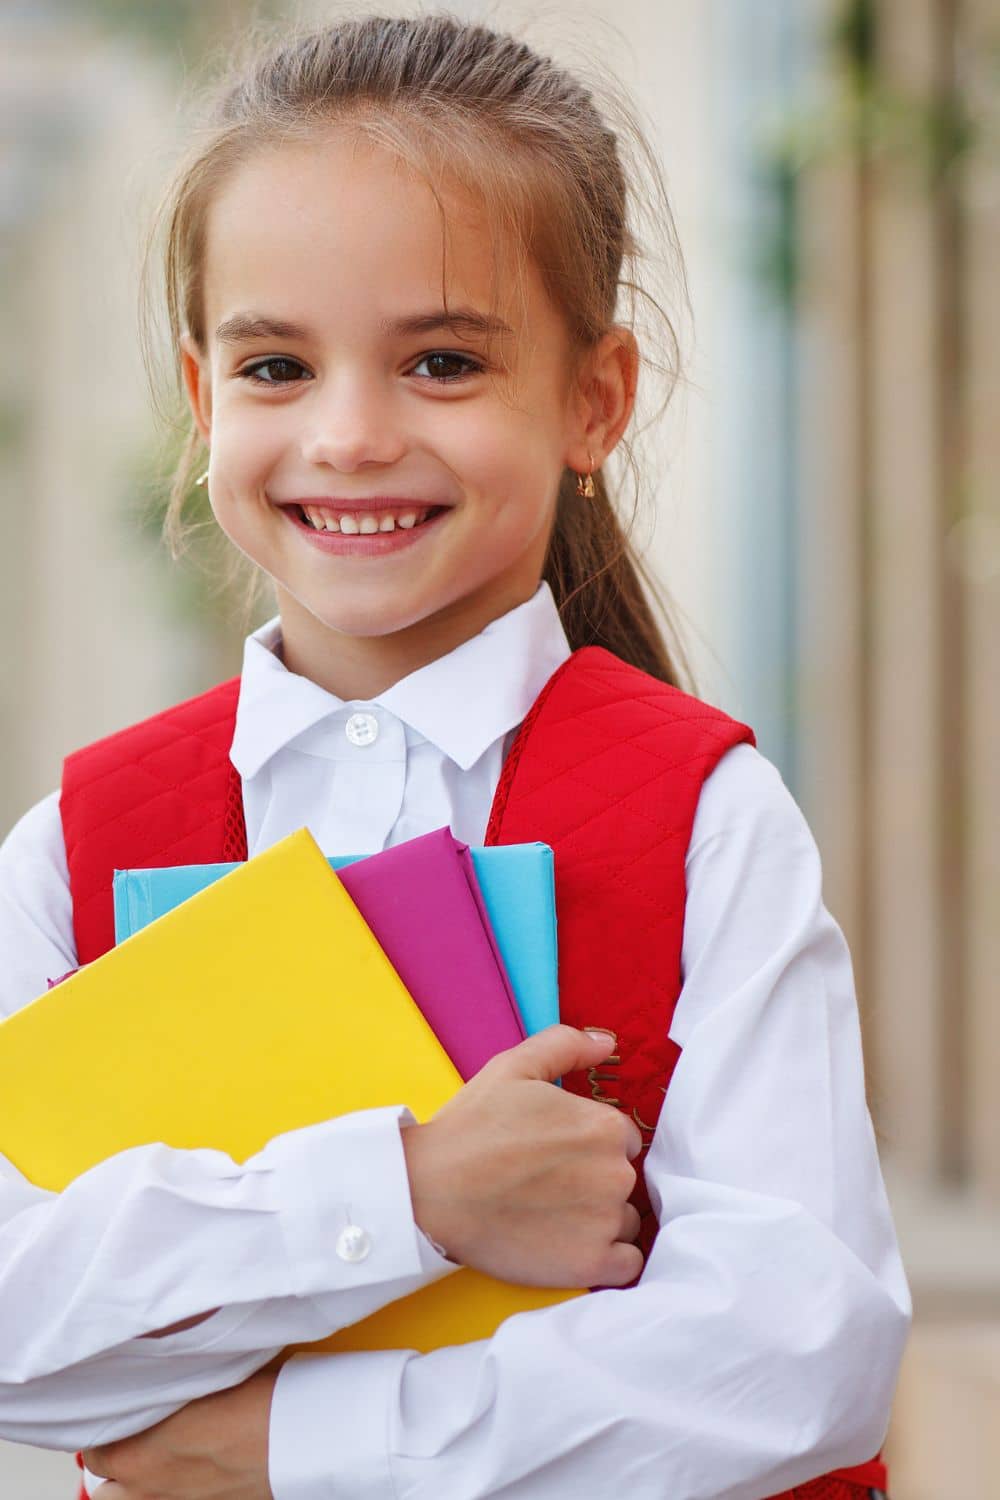 Top Tips To Help You Find The Right School For Your Kids 